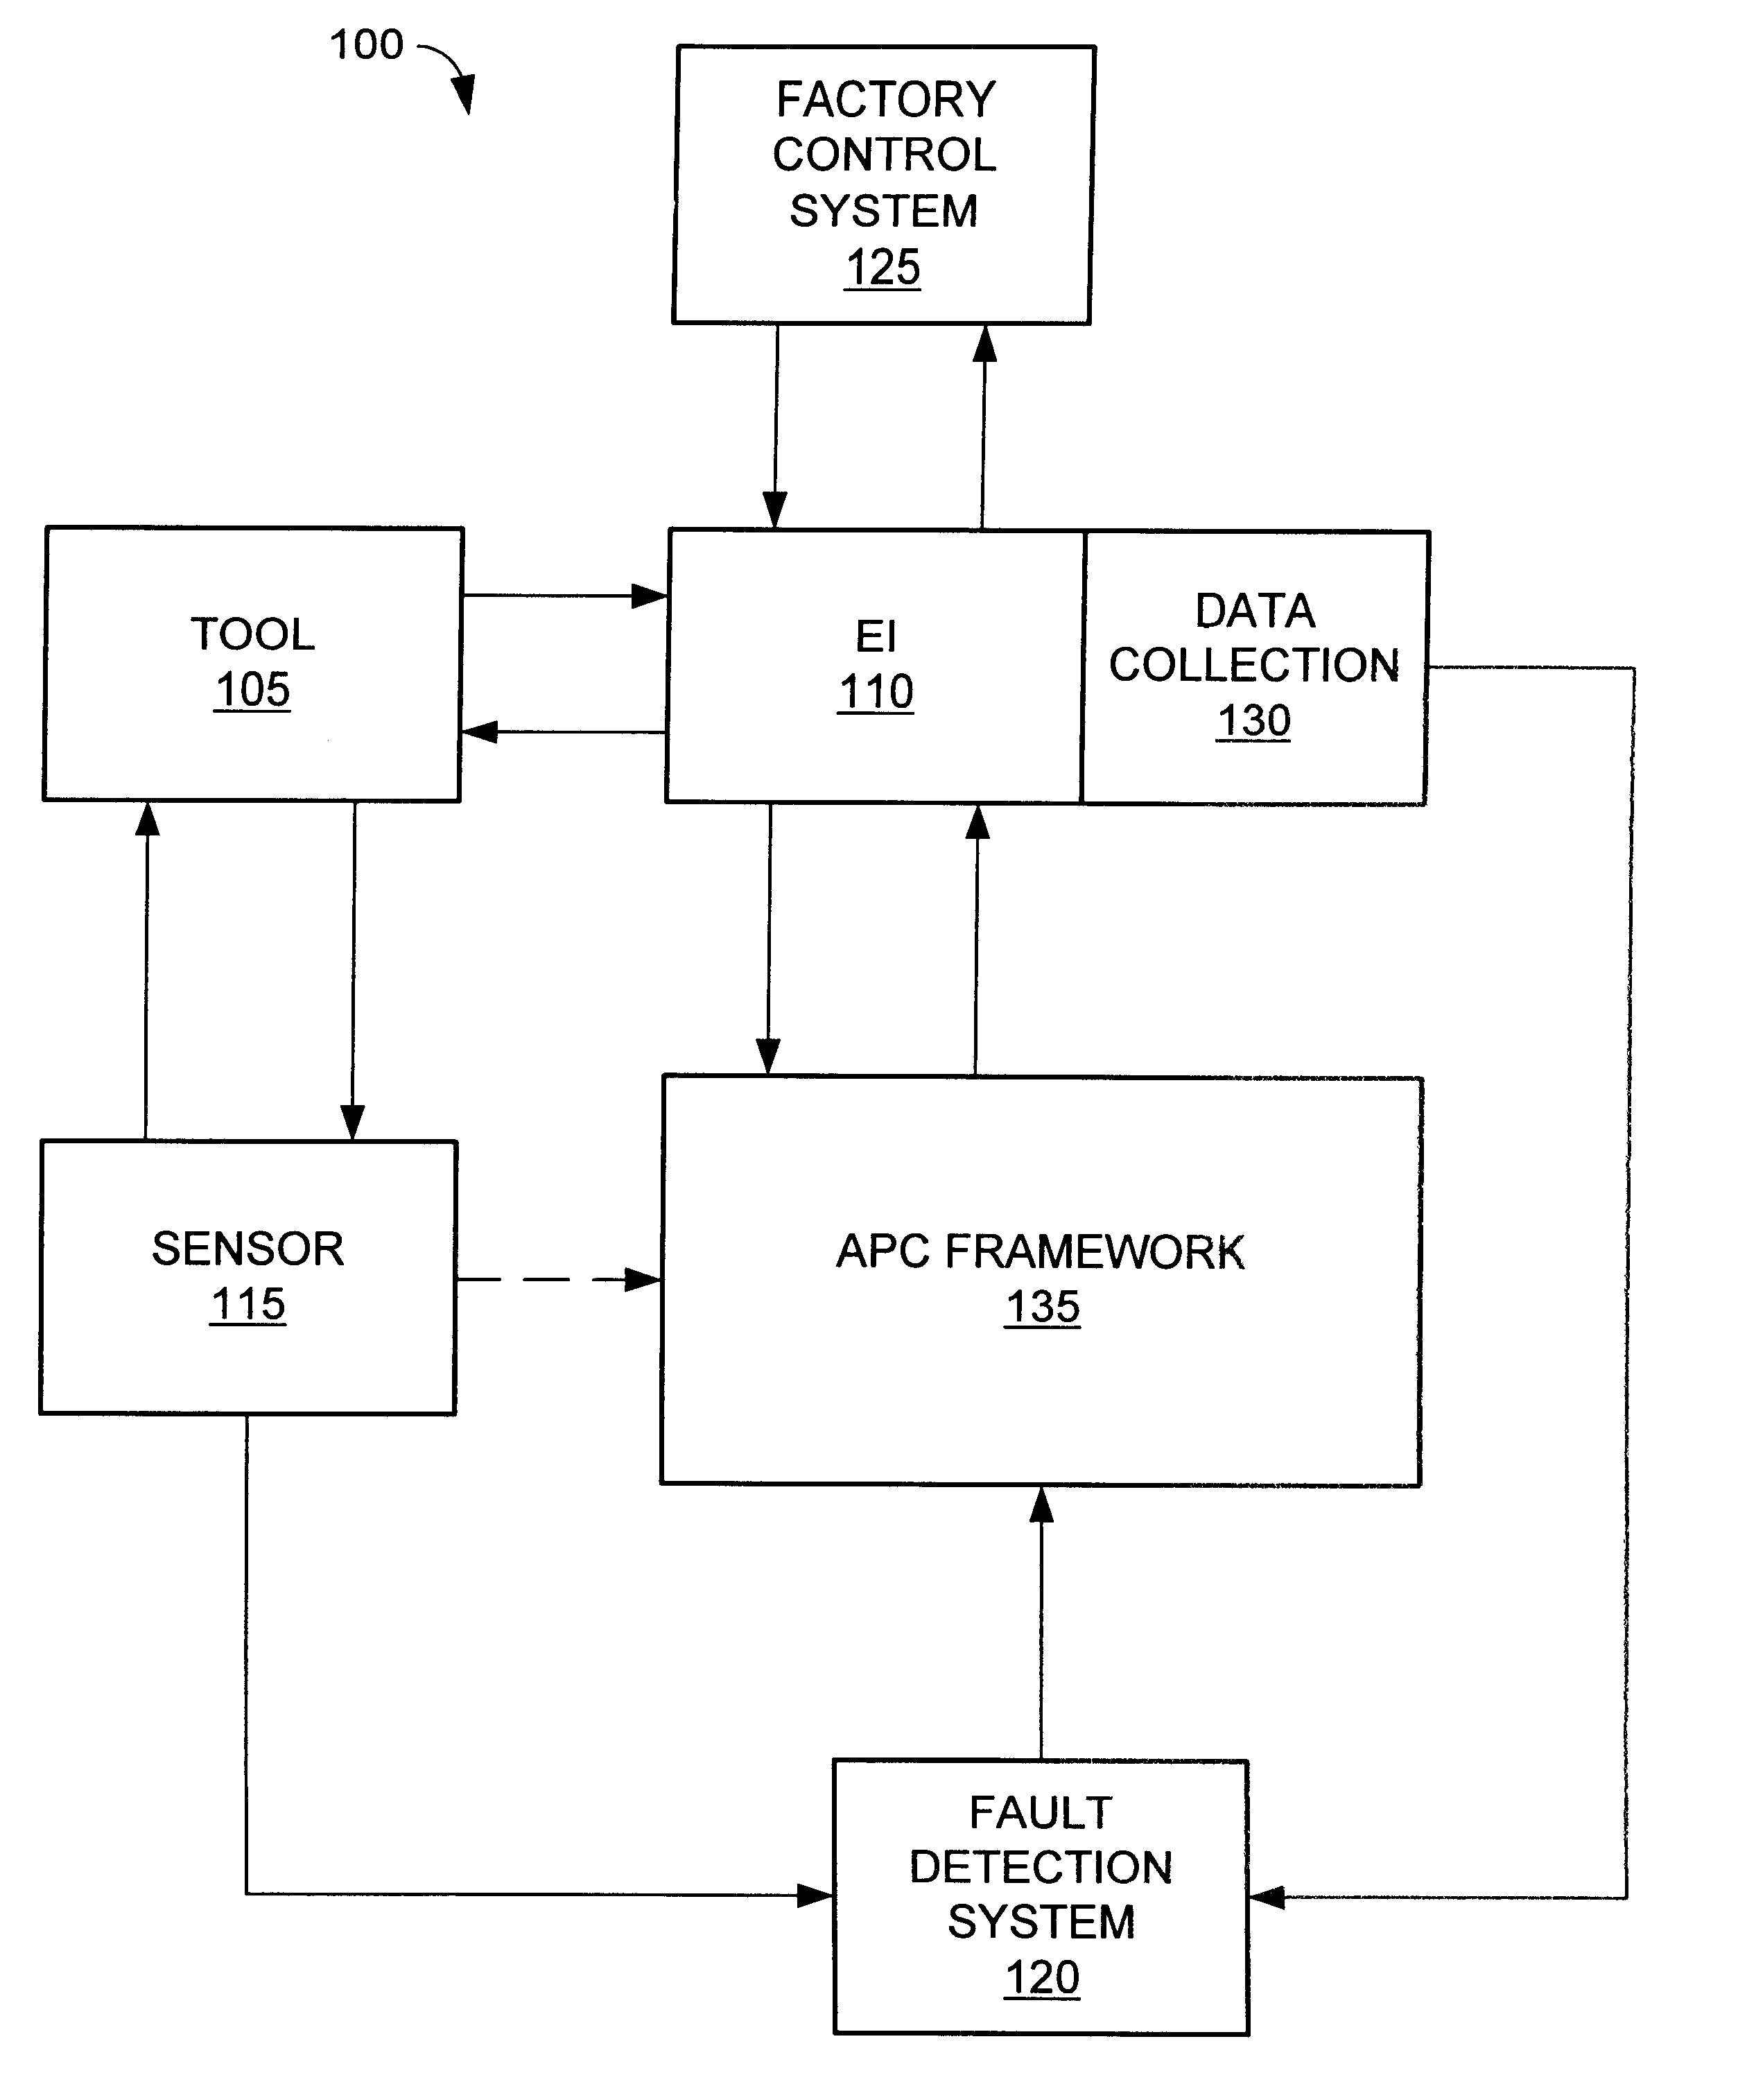 Method and apparatus for fault detection of a processing tool and control thereof using an advanced process control (APC) framework